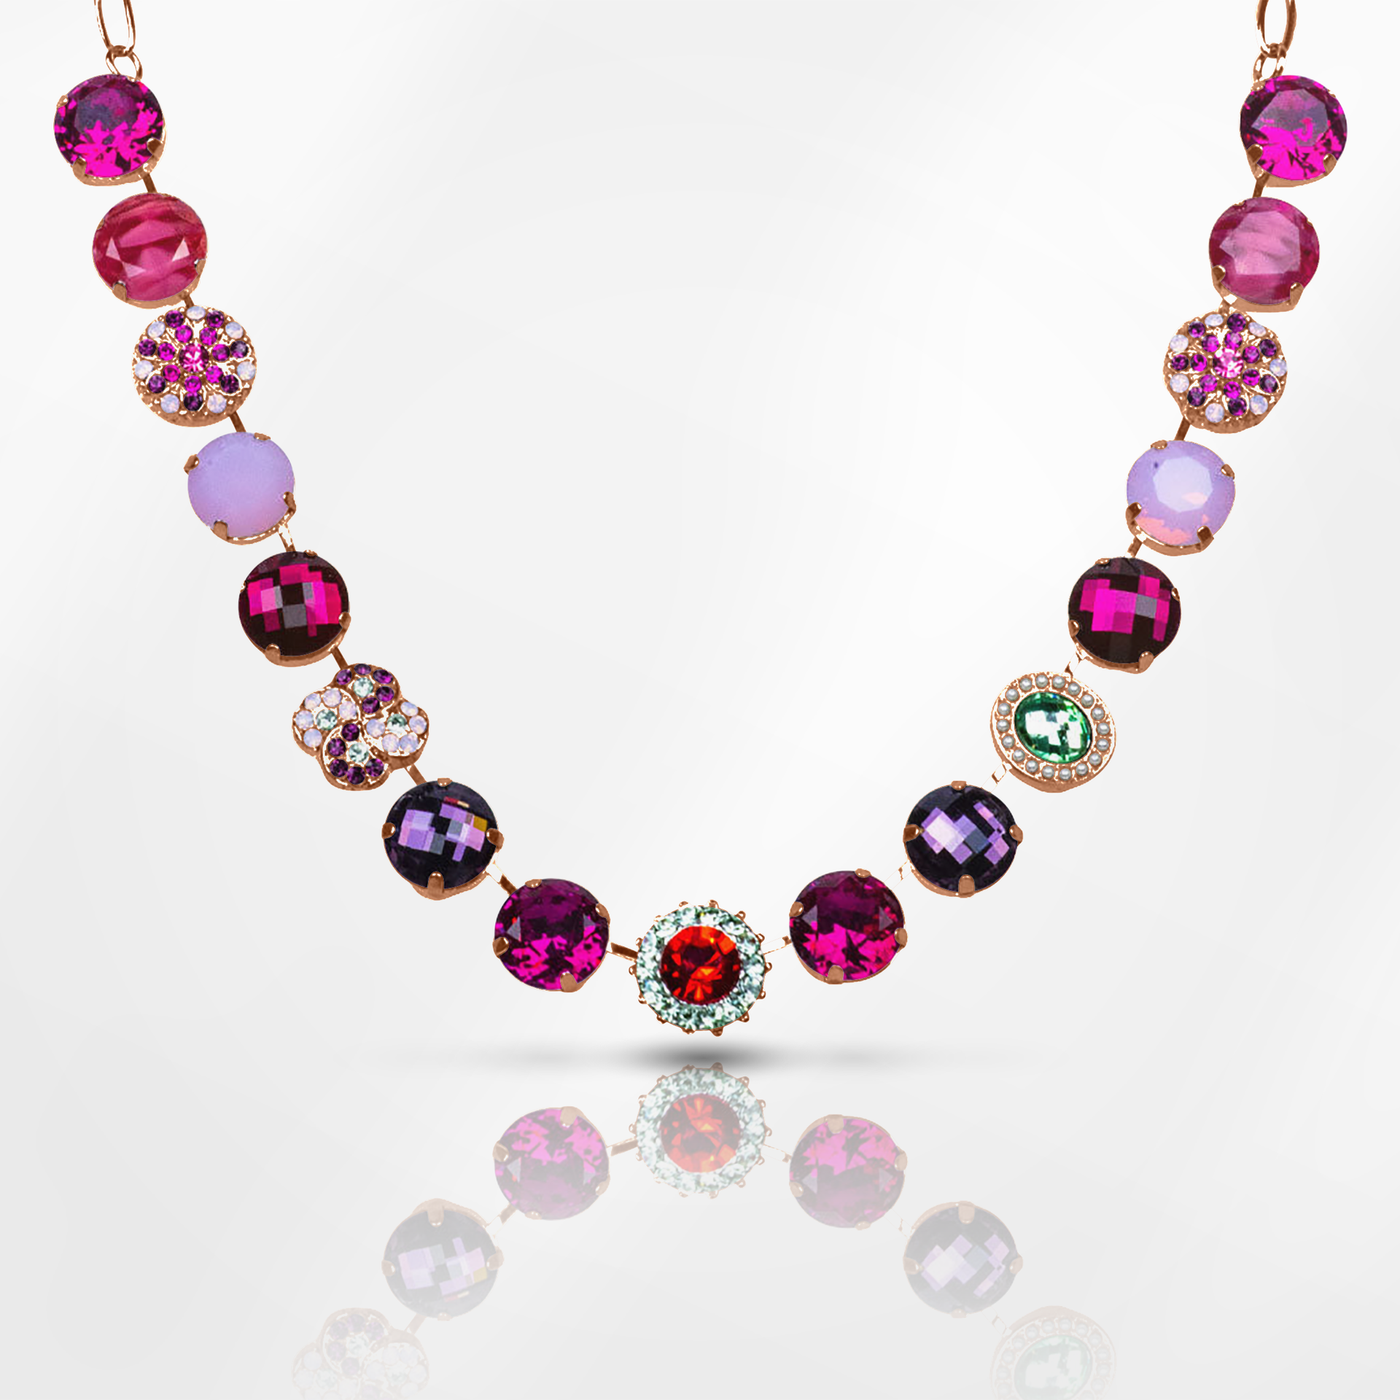 Extra Luxurious Cluster "Enchanted" Necklace